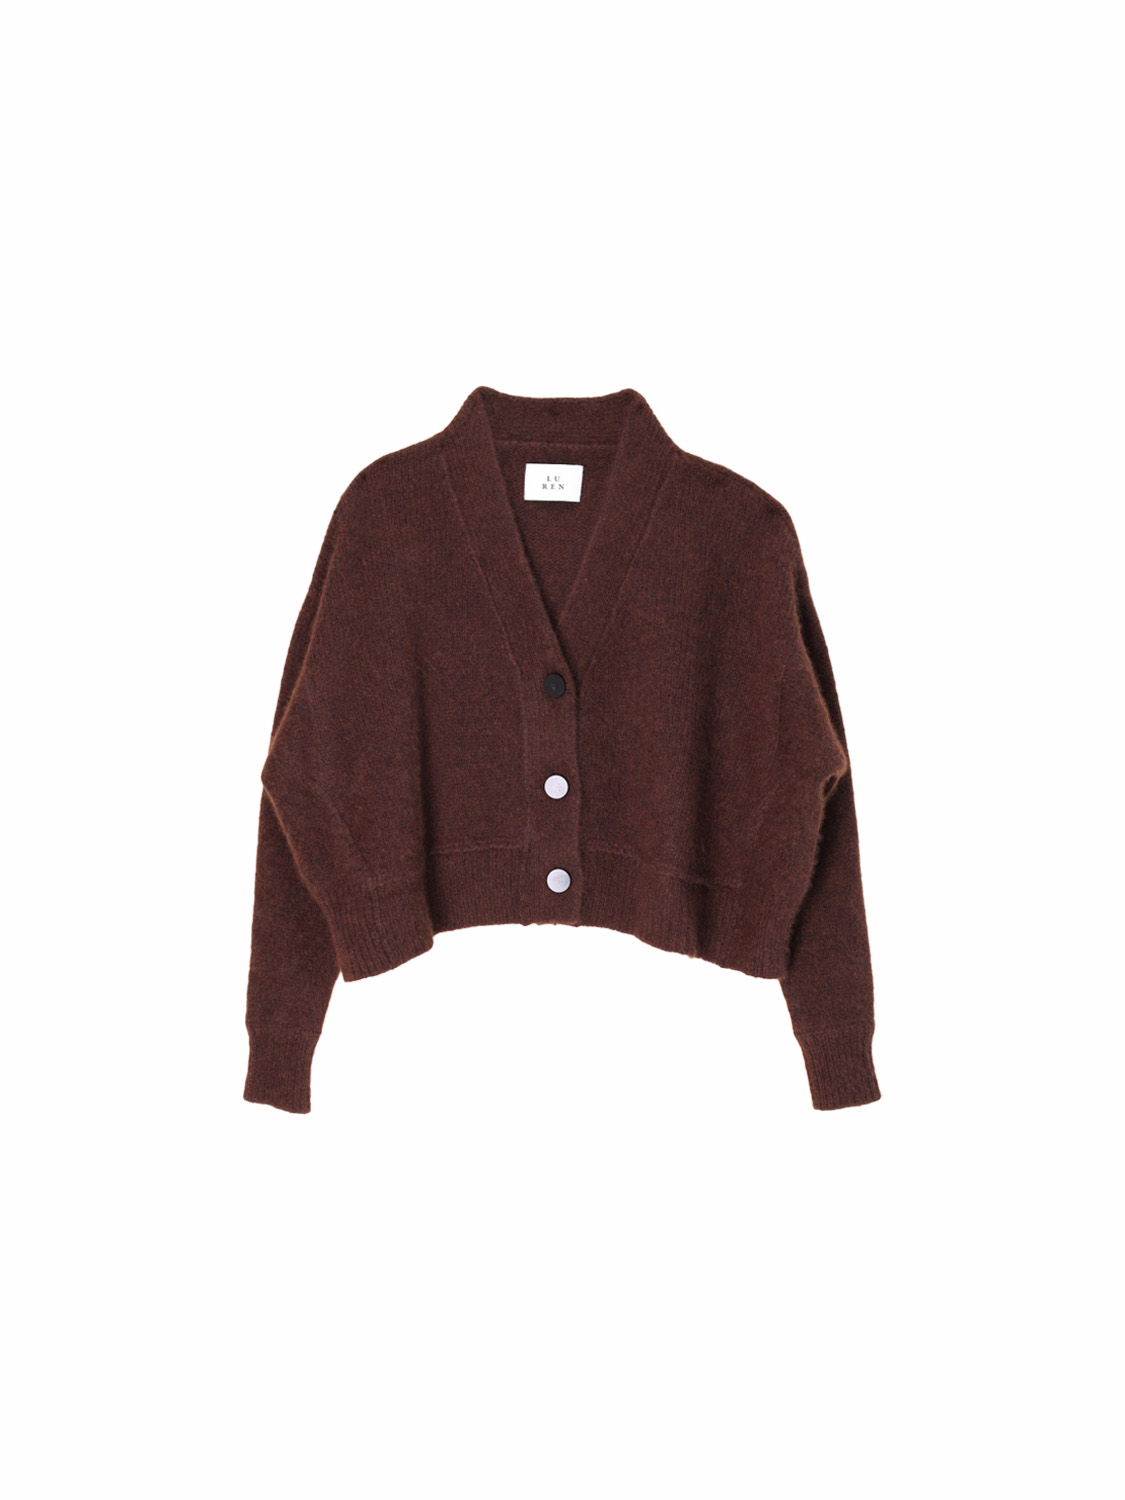 Riely.D - Knit Cardigan made of Cashmere